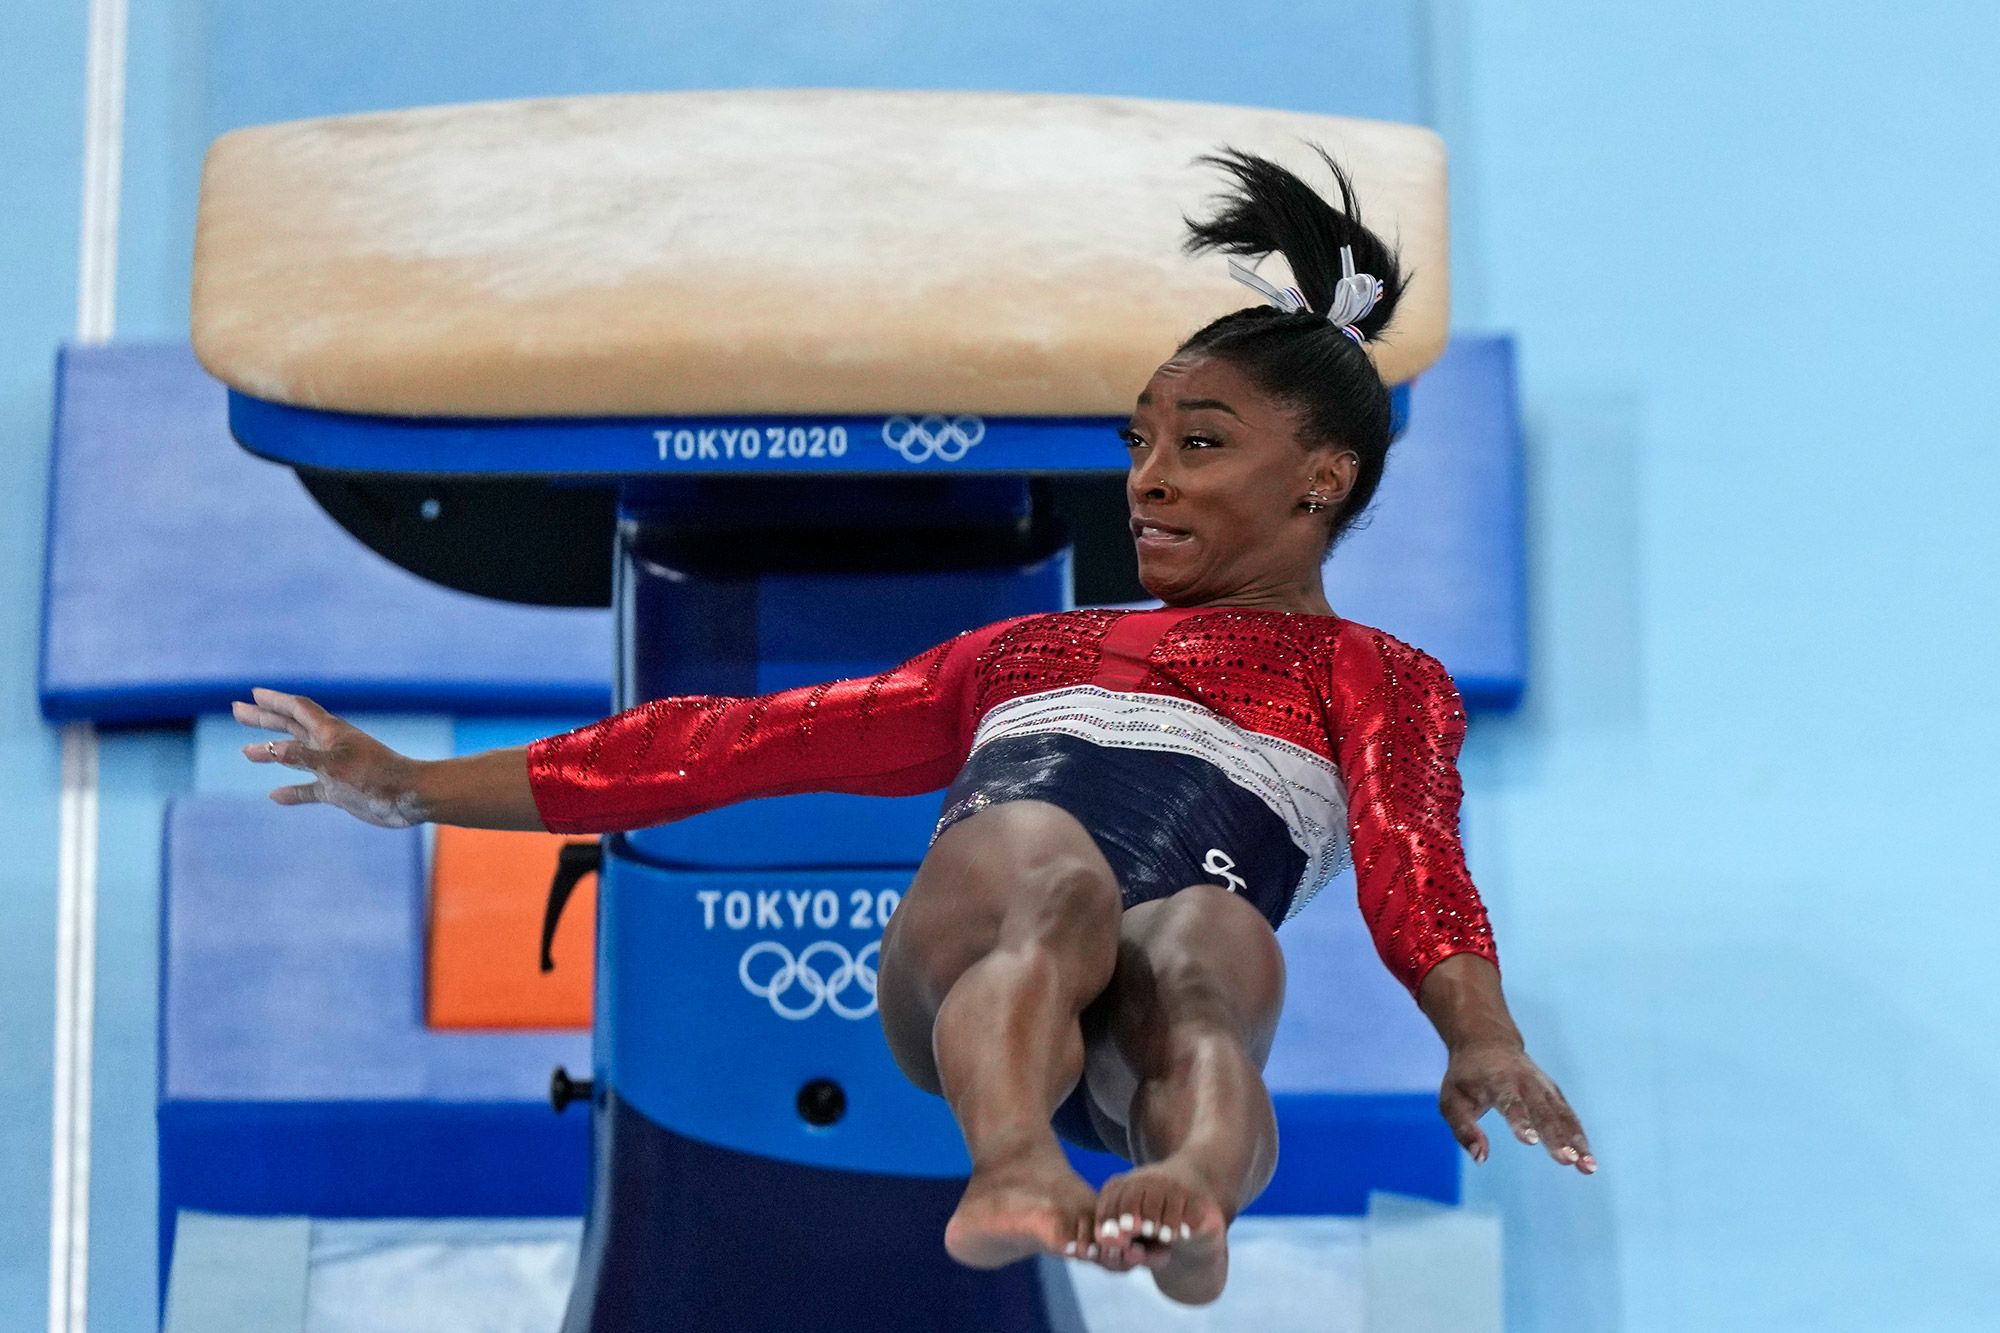 Simone Biles ends the first day of competition at the US Gymnastics  Championships with the lead